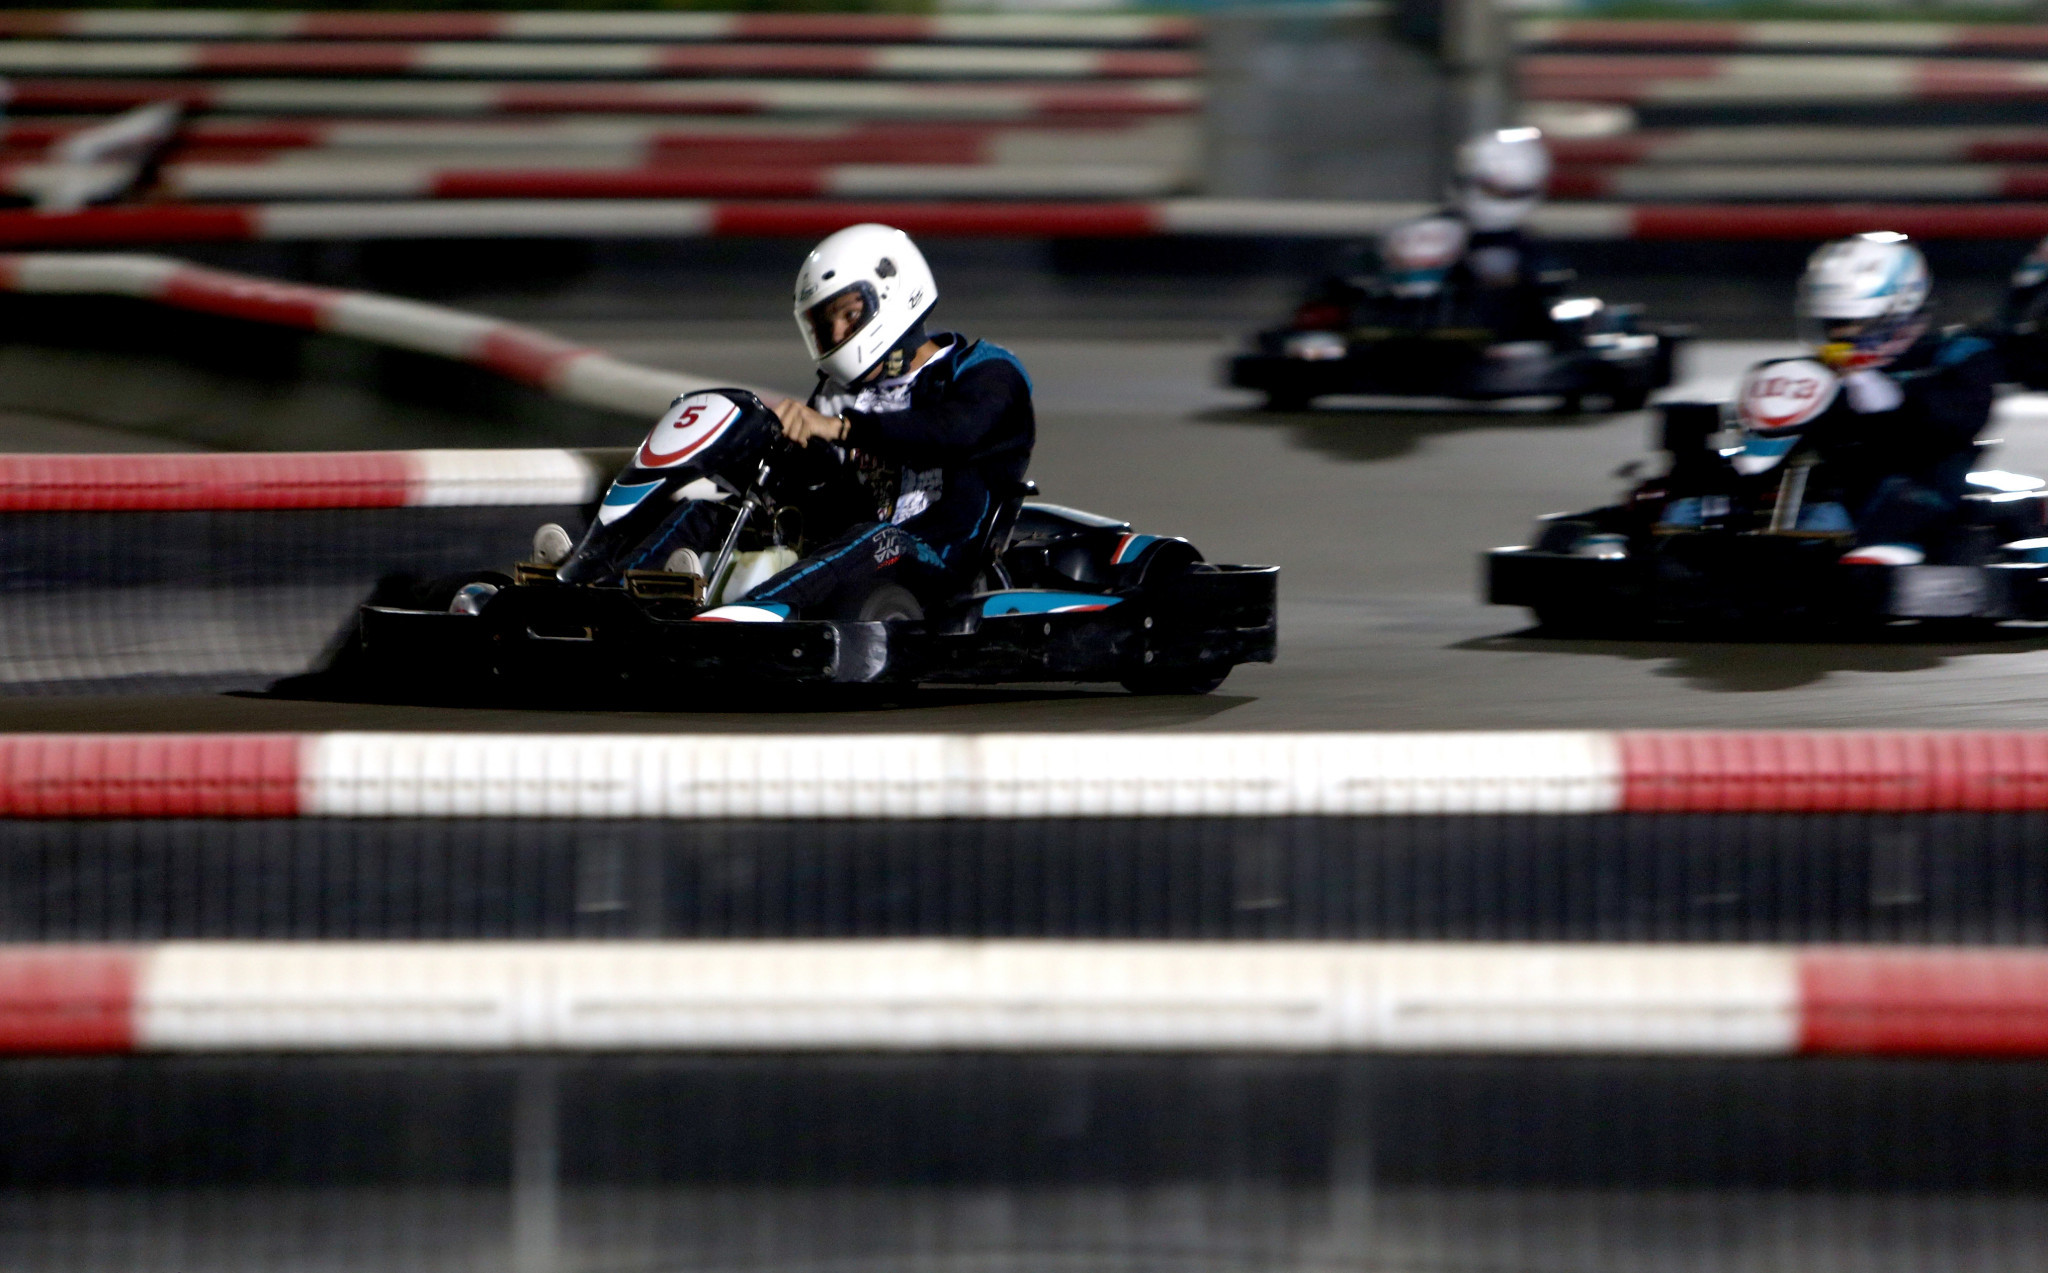 Drivers geared up for start of FIA Motorsport Games in Marseille